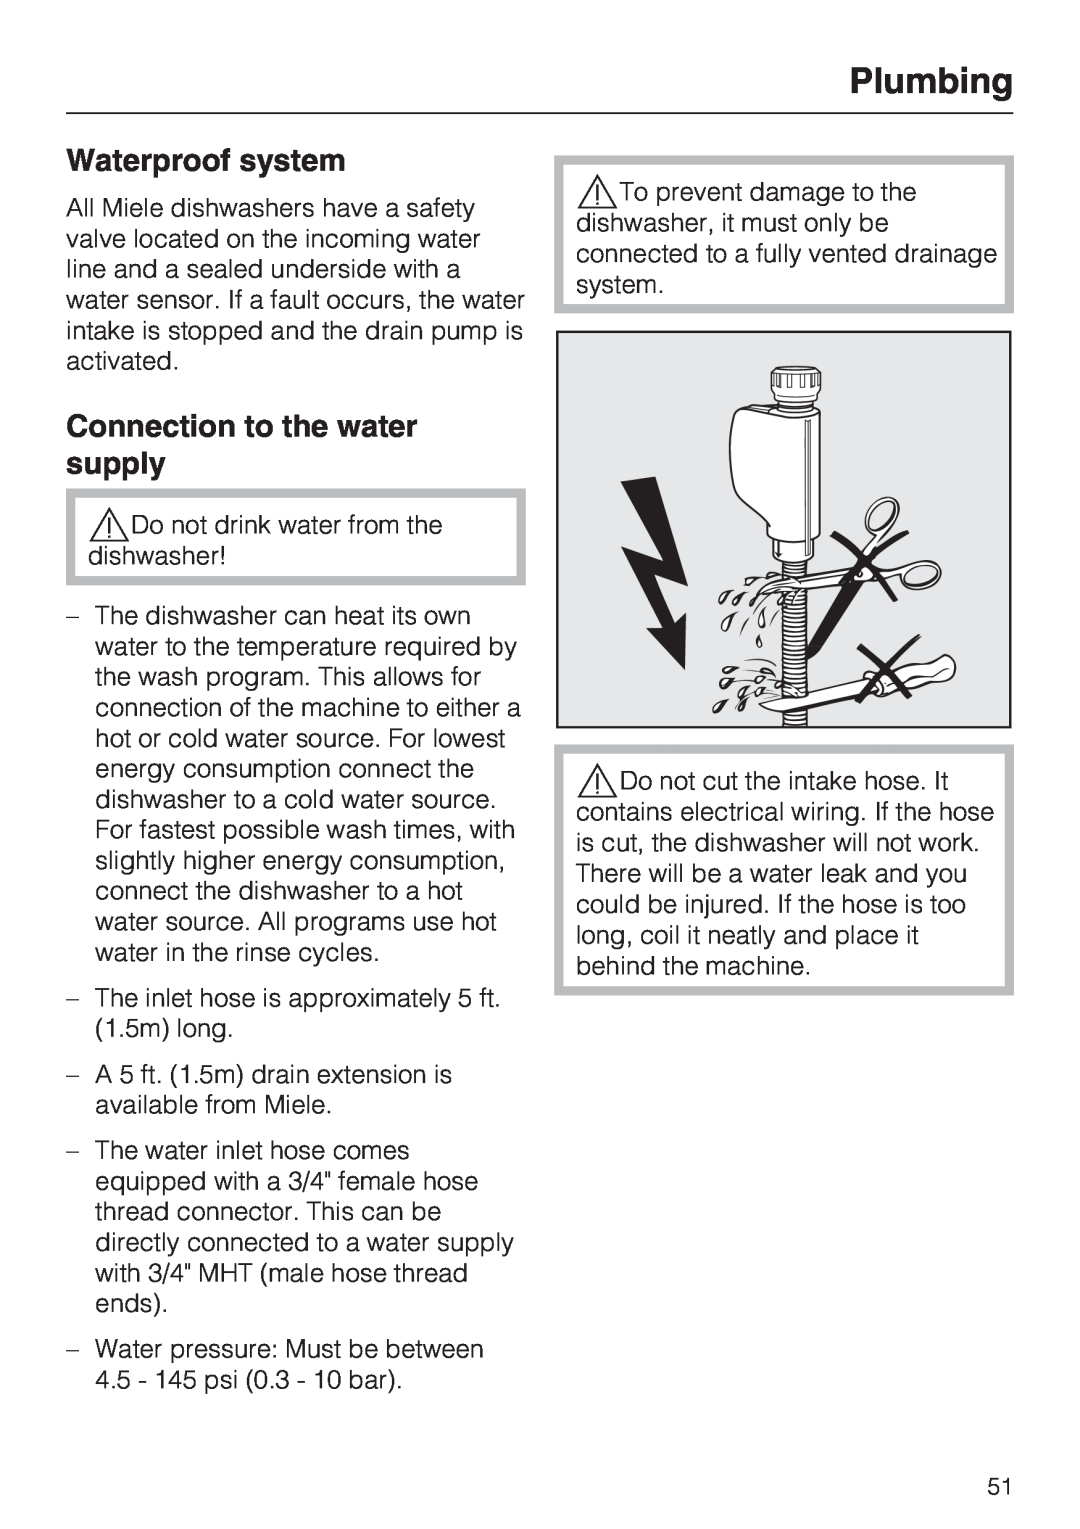 Miele G 1181, G 2181 operating instructions Plumbing, Waterproof system, Connection to the water supply 